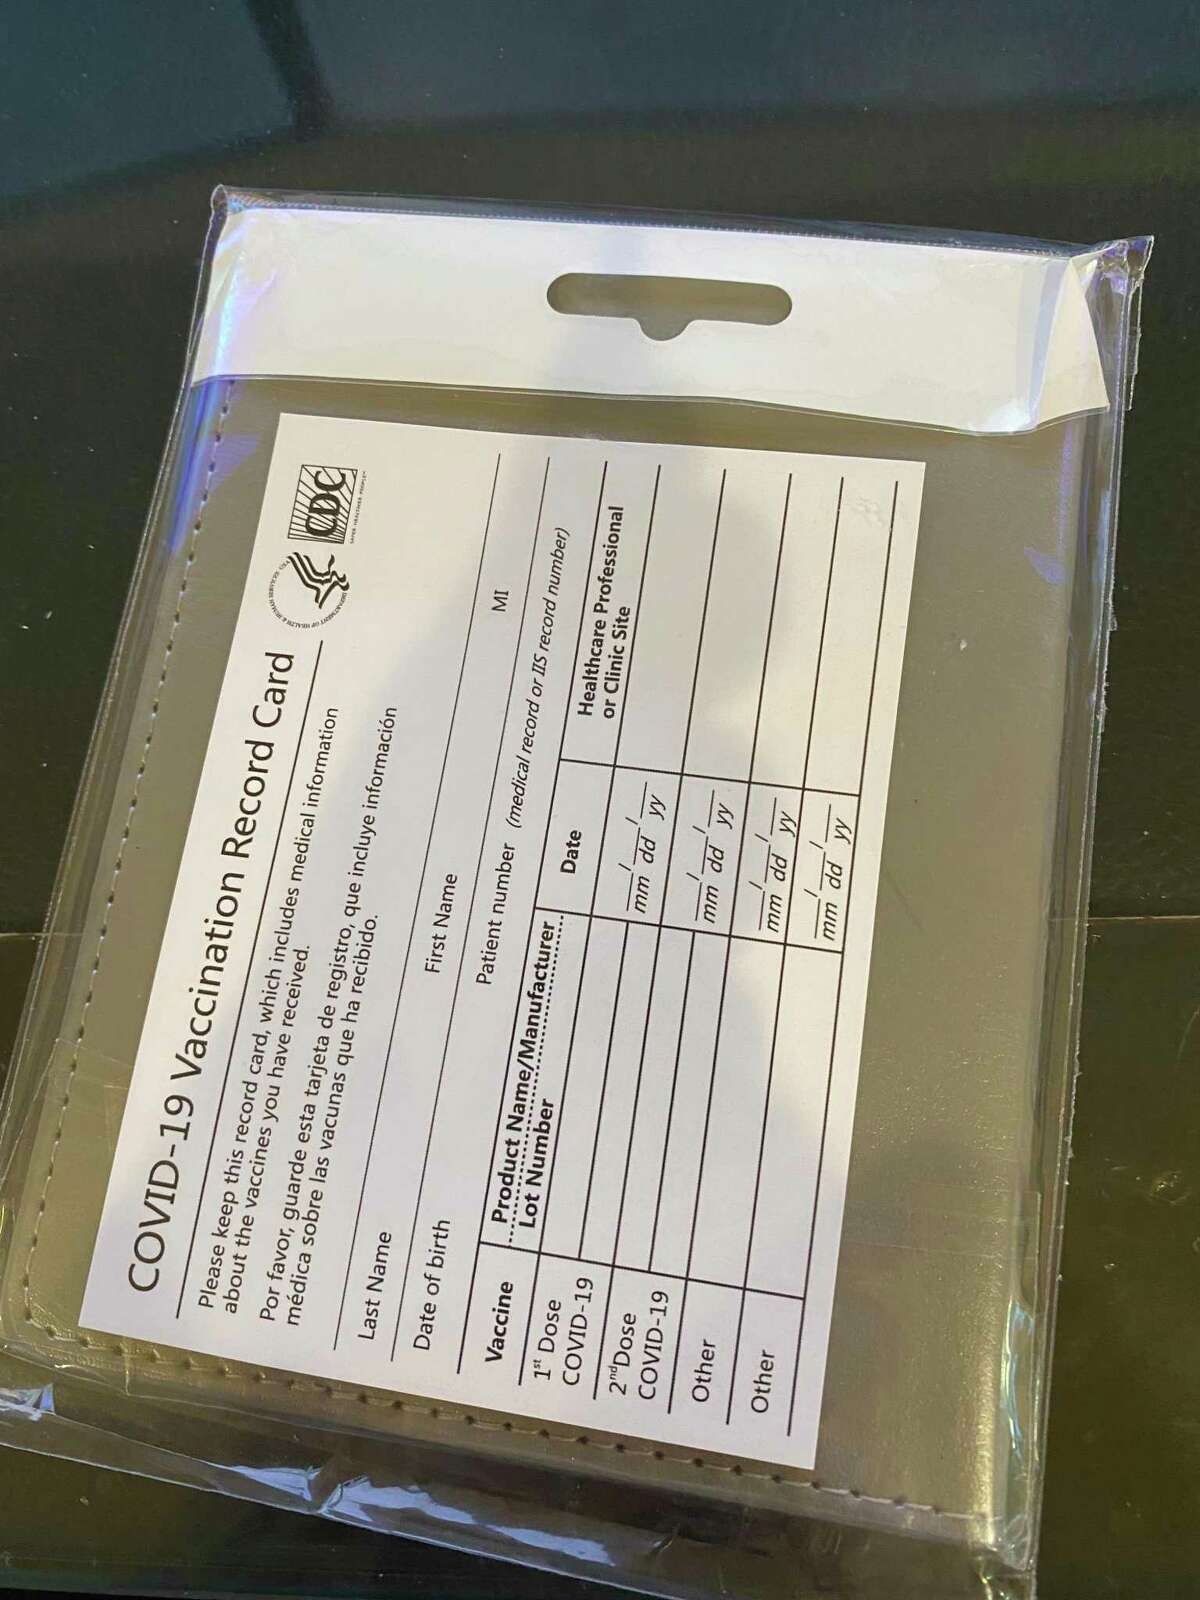 A fake COVID-19 vaccination card a Stamford, Conn. resident said he received along with the passport holder he ordered off of Amazon.